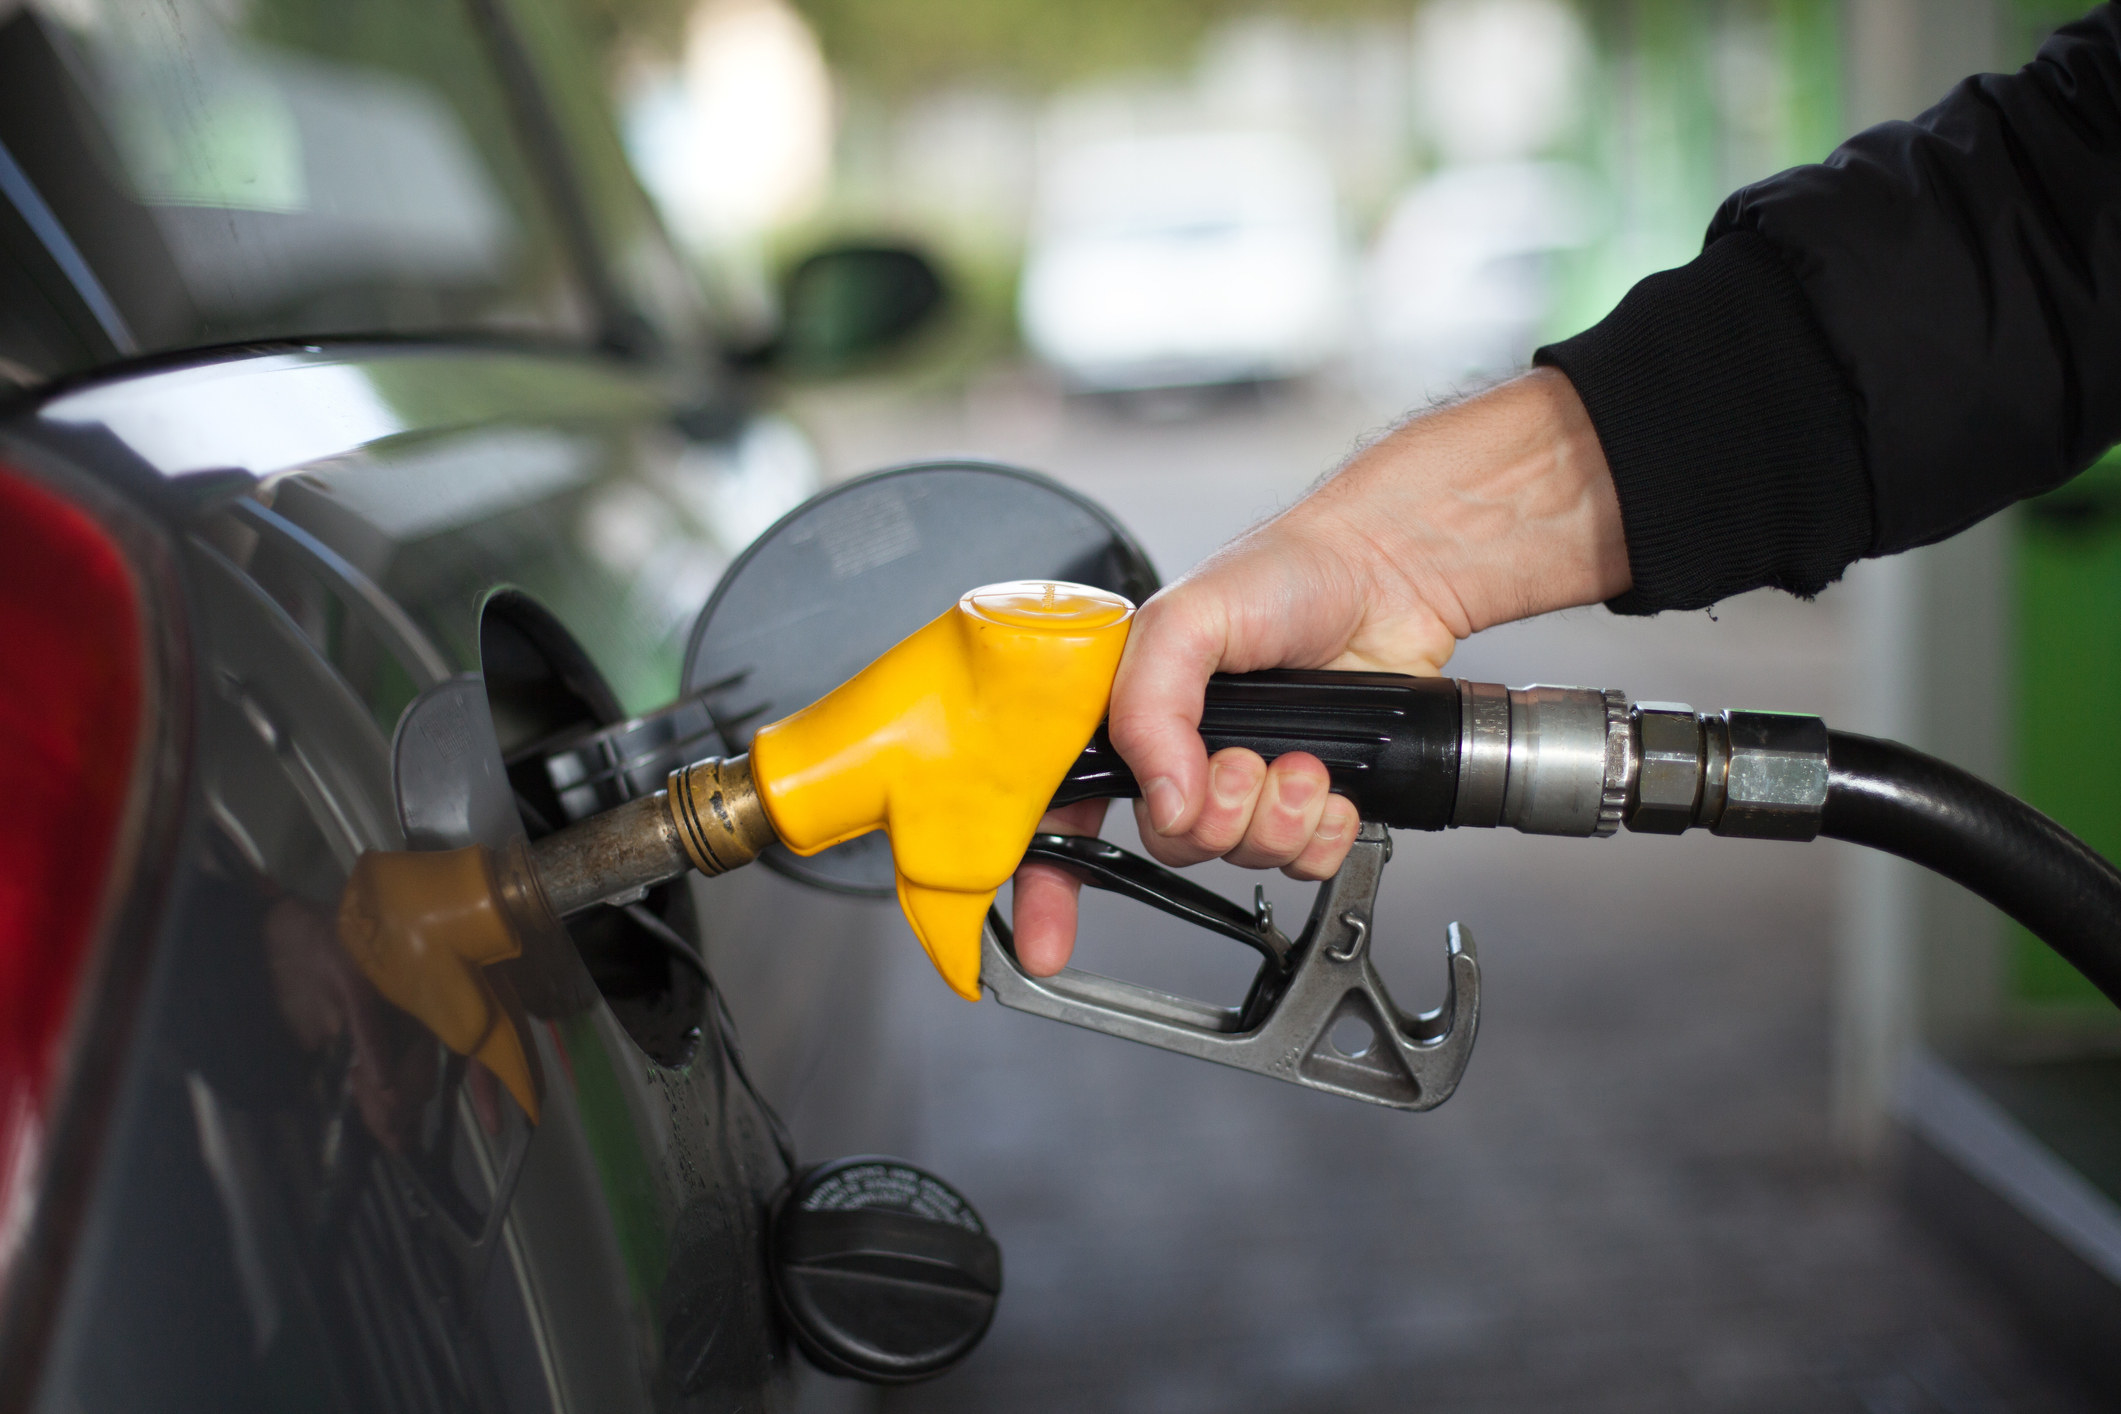 A person's hand pumping gas into a car